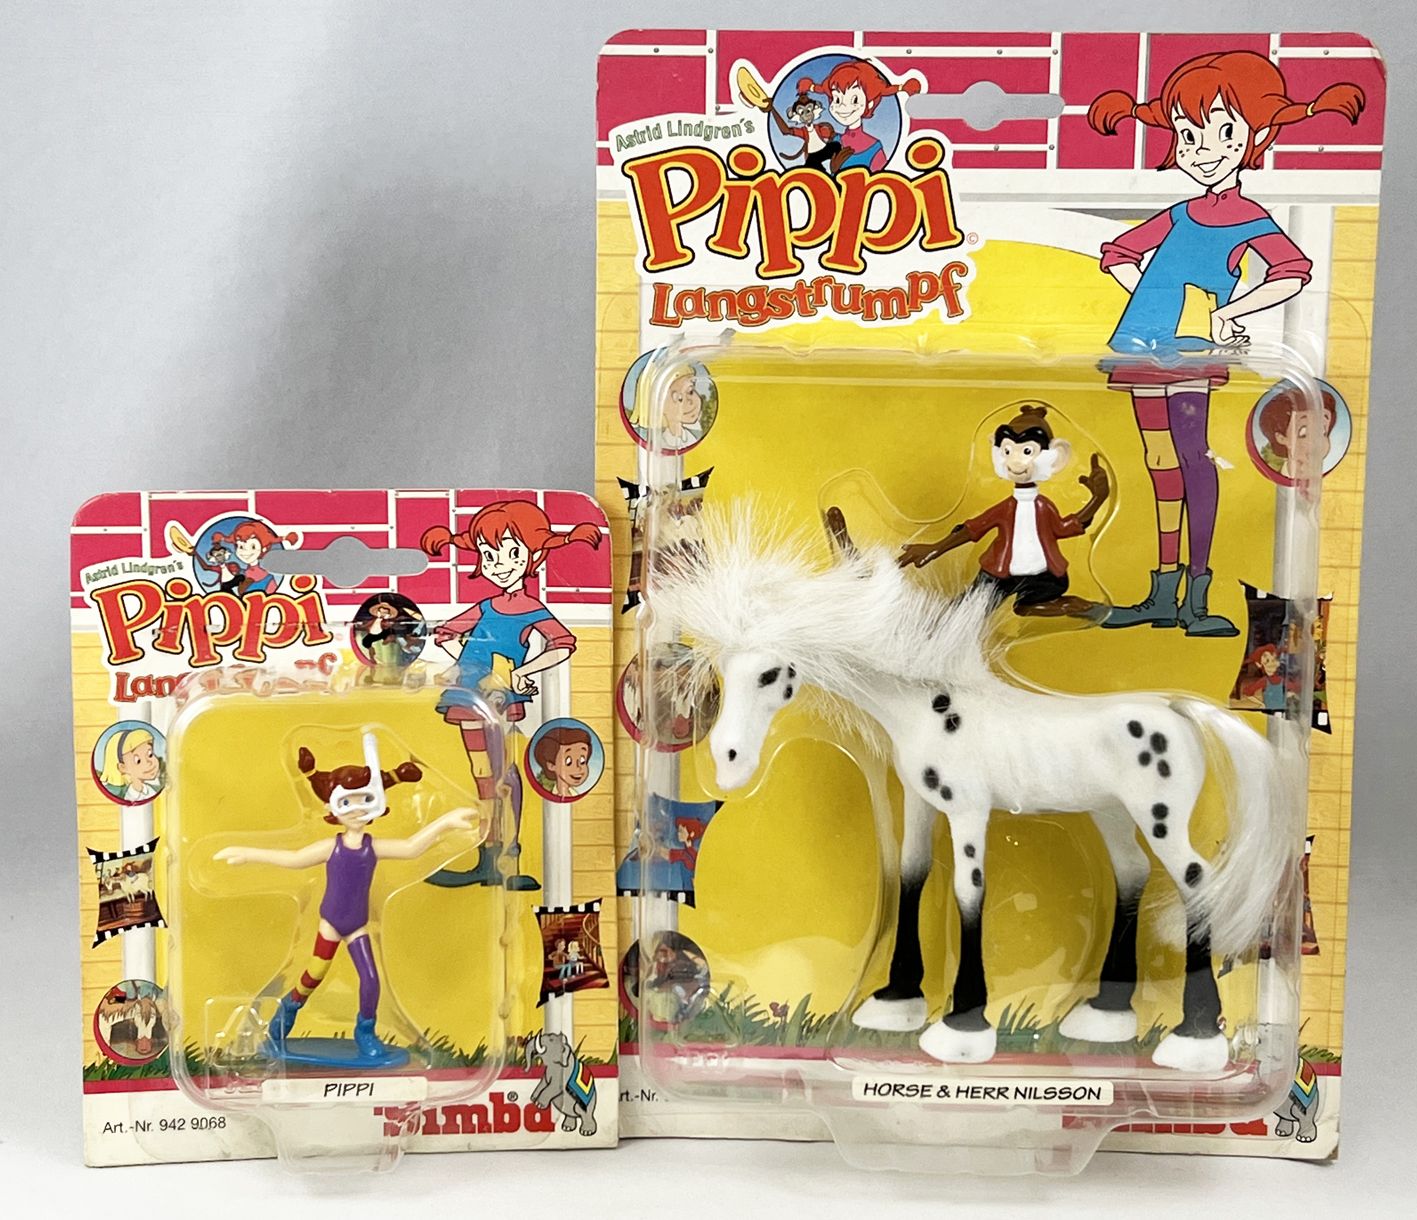 Langstrumpf - Simba PVC figure Pipi (in beach outfit), Herr Nilsson and Horse